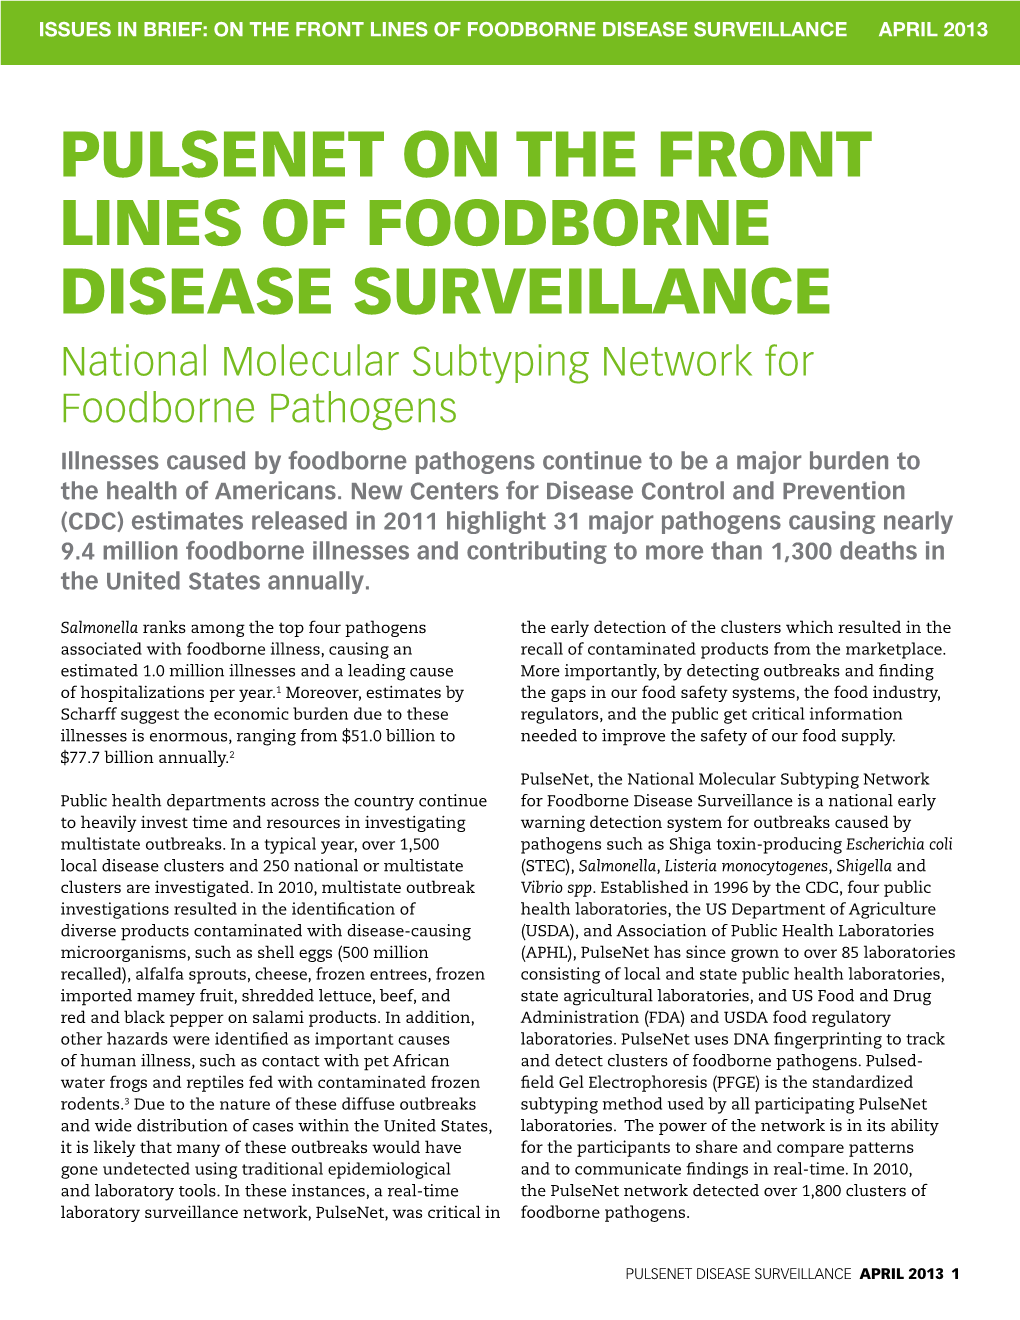 Pulsenet: on the Front Lines of Foodborne Disease Surveillance